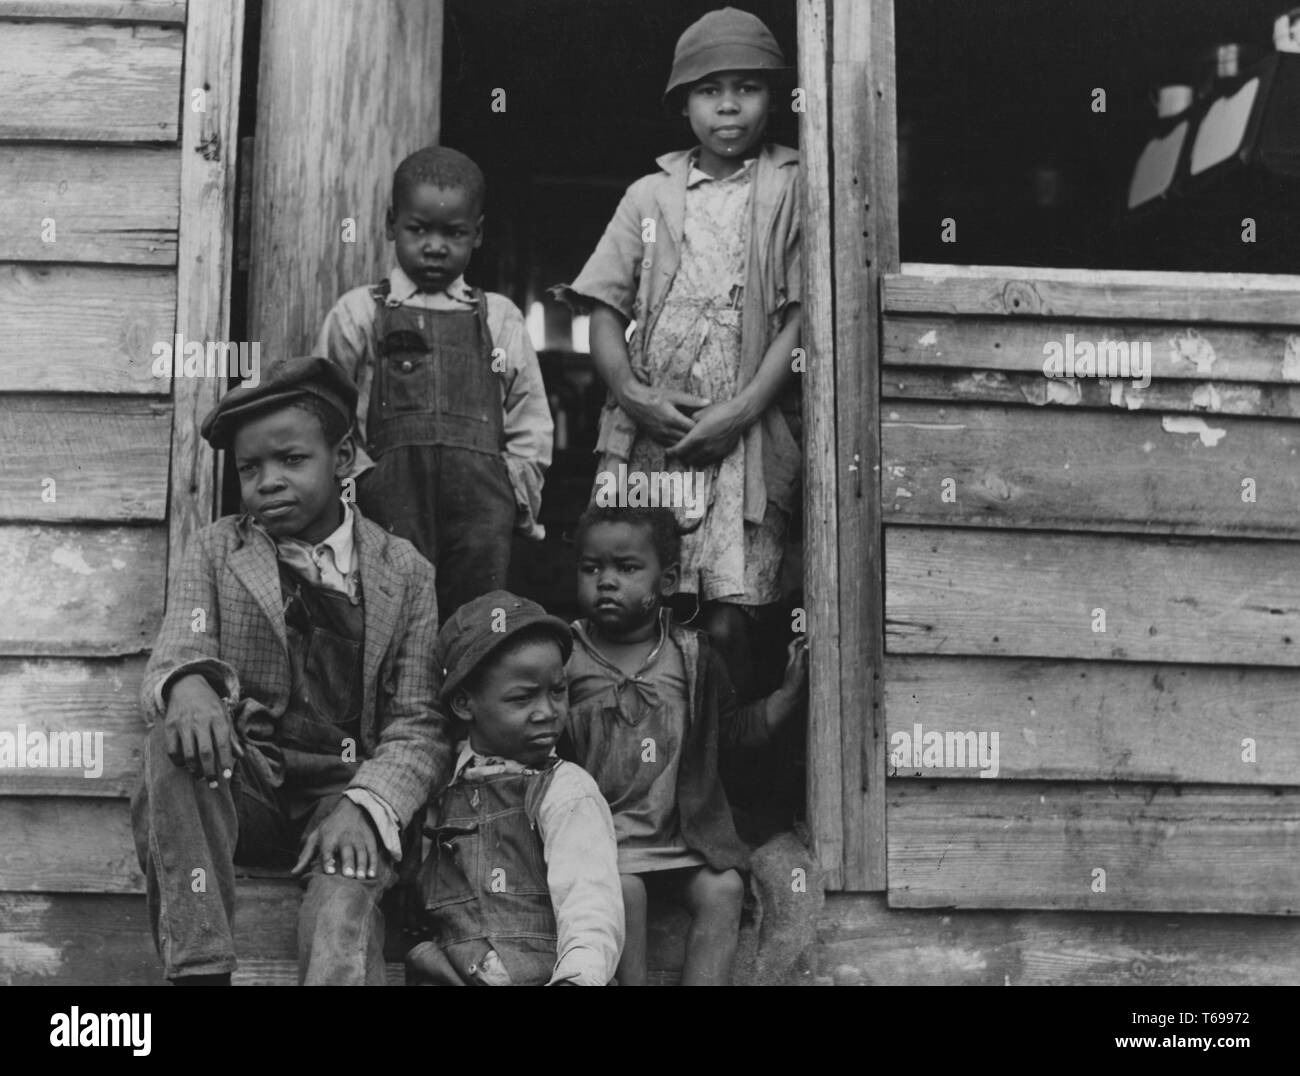 Black and white photograph of three boys and two girls (the oldest girl, wearing a cloche hat and facing the camera) sitting and standing in the doorway to a weathered, wooden building; located in South Carolina, USA; photographed by Jack Delano under the sponsorship of the United States' Farm Security Administration, 1940. From the New York Public Library. () Stock Photo